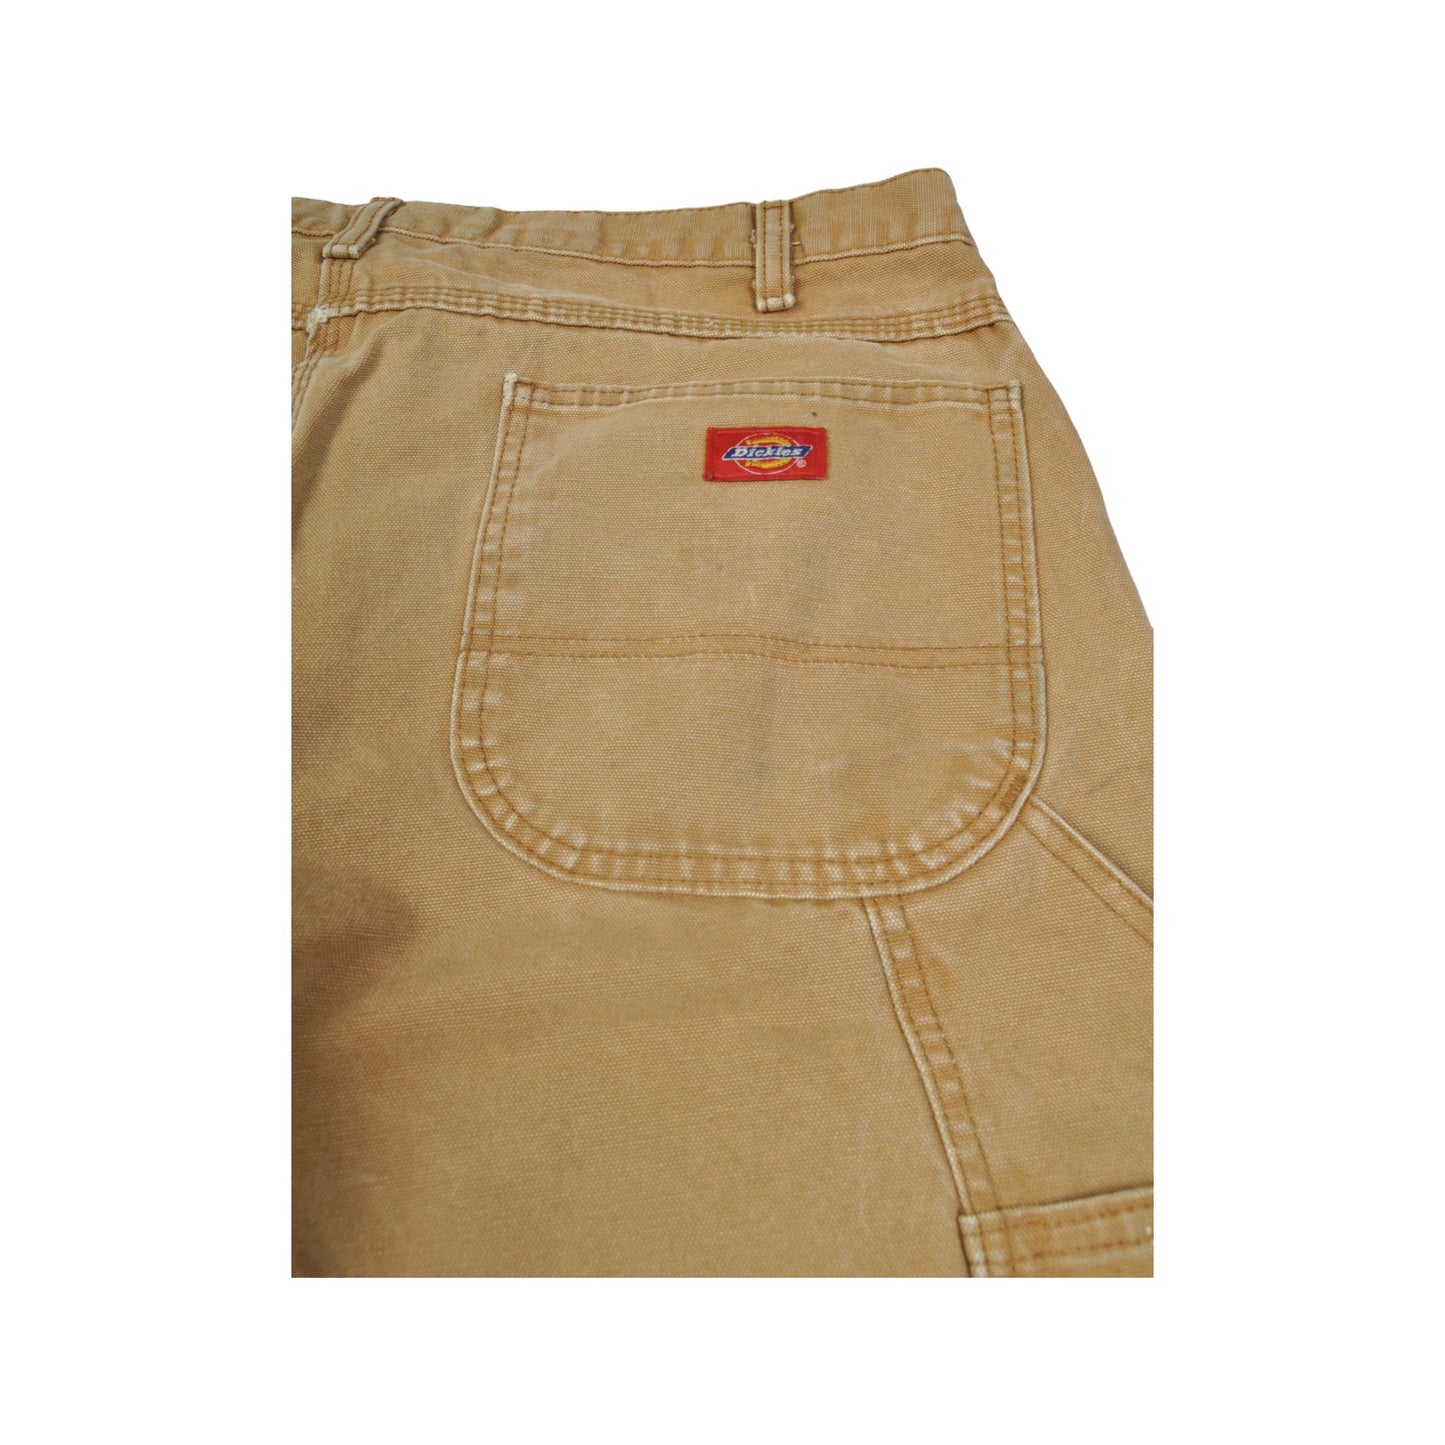 Vintage Dickies Carpenter Pants Relaxed Fit Tan W38 L30